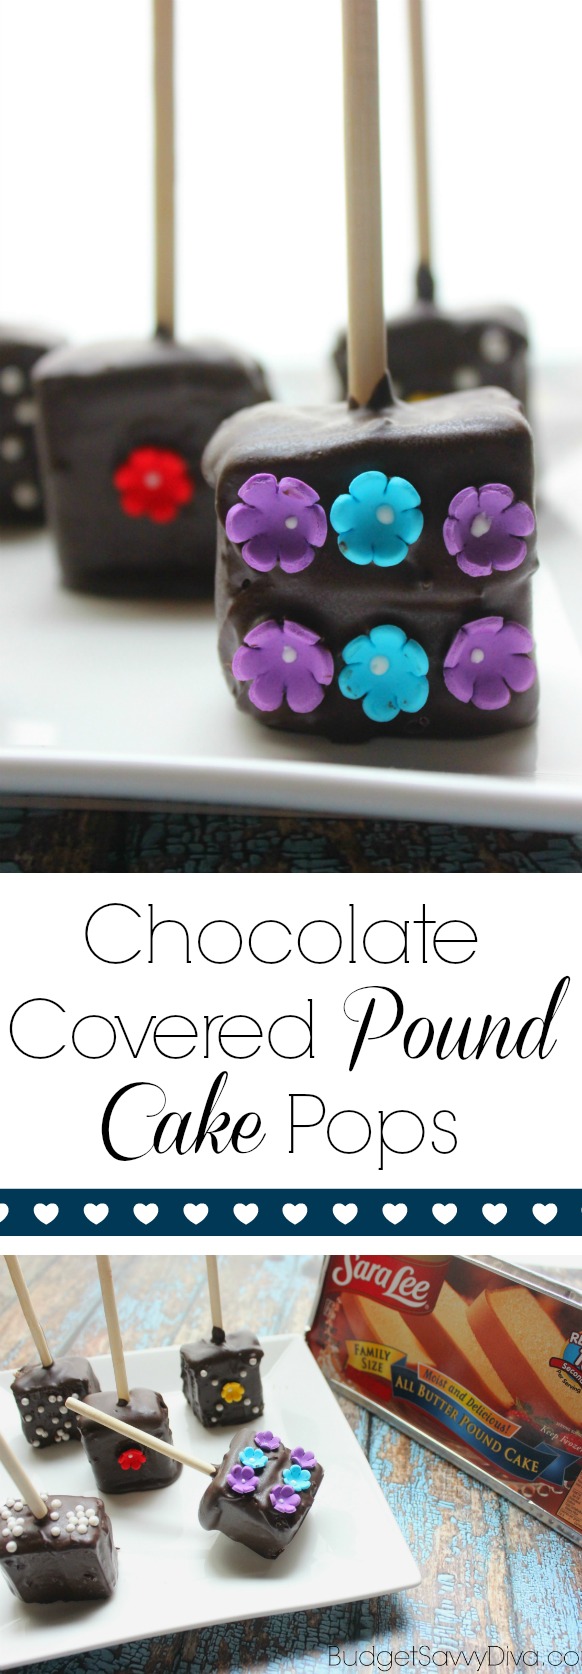 Chocolate Covered Pound Cake Pops 1